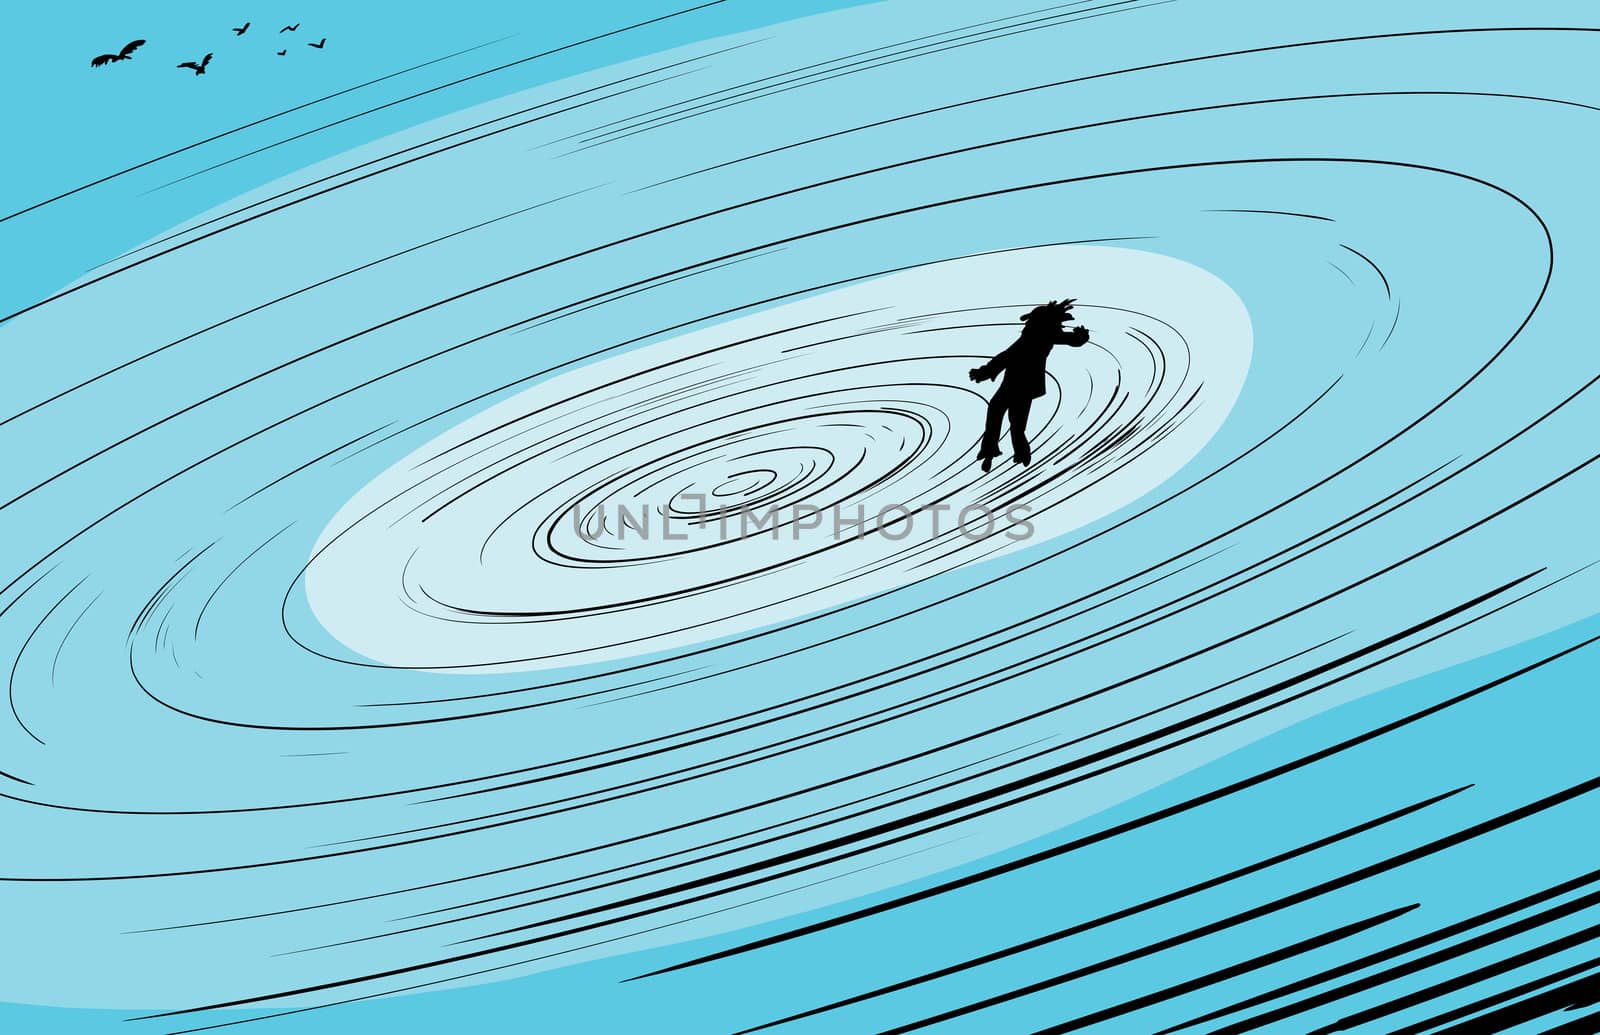 Single person floating toward center of spinning whirlpool with flock of birds nearby